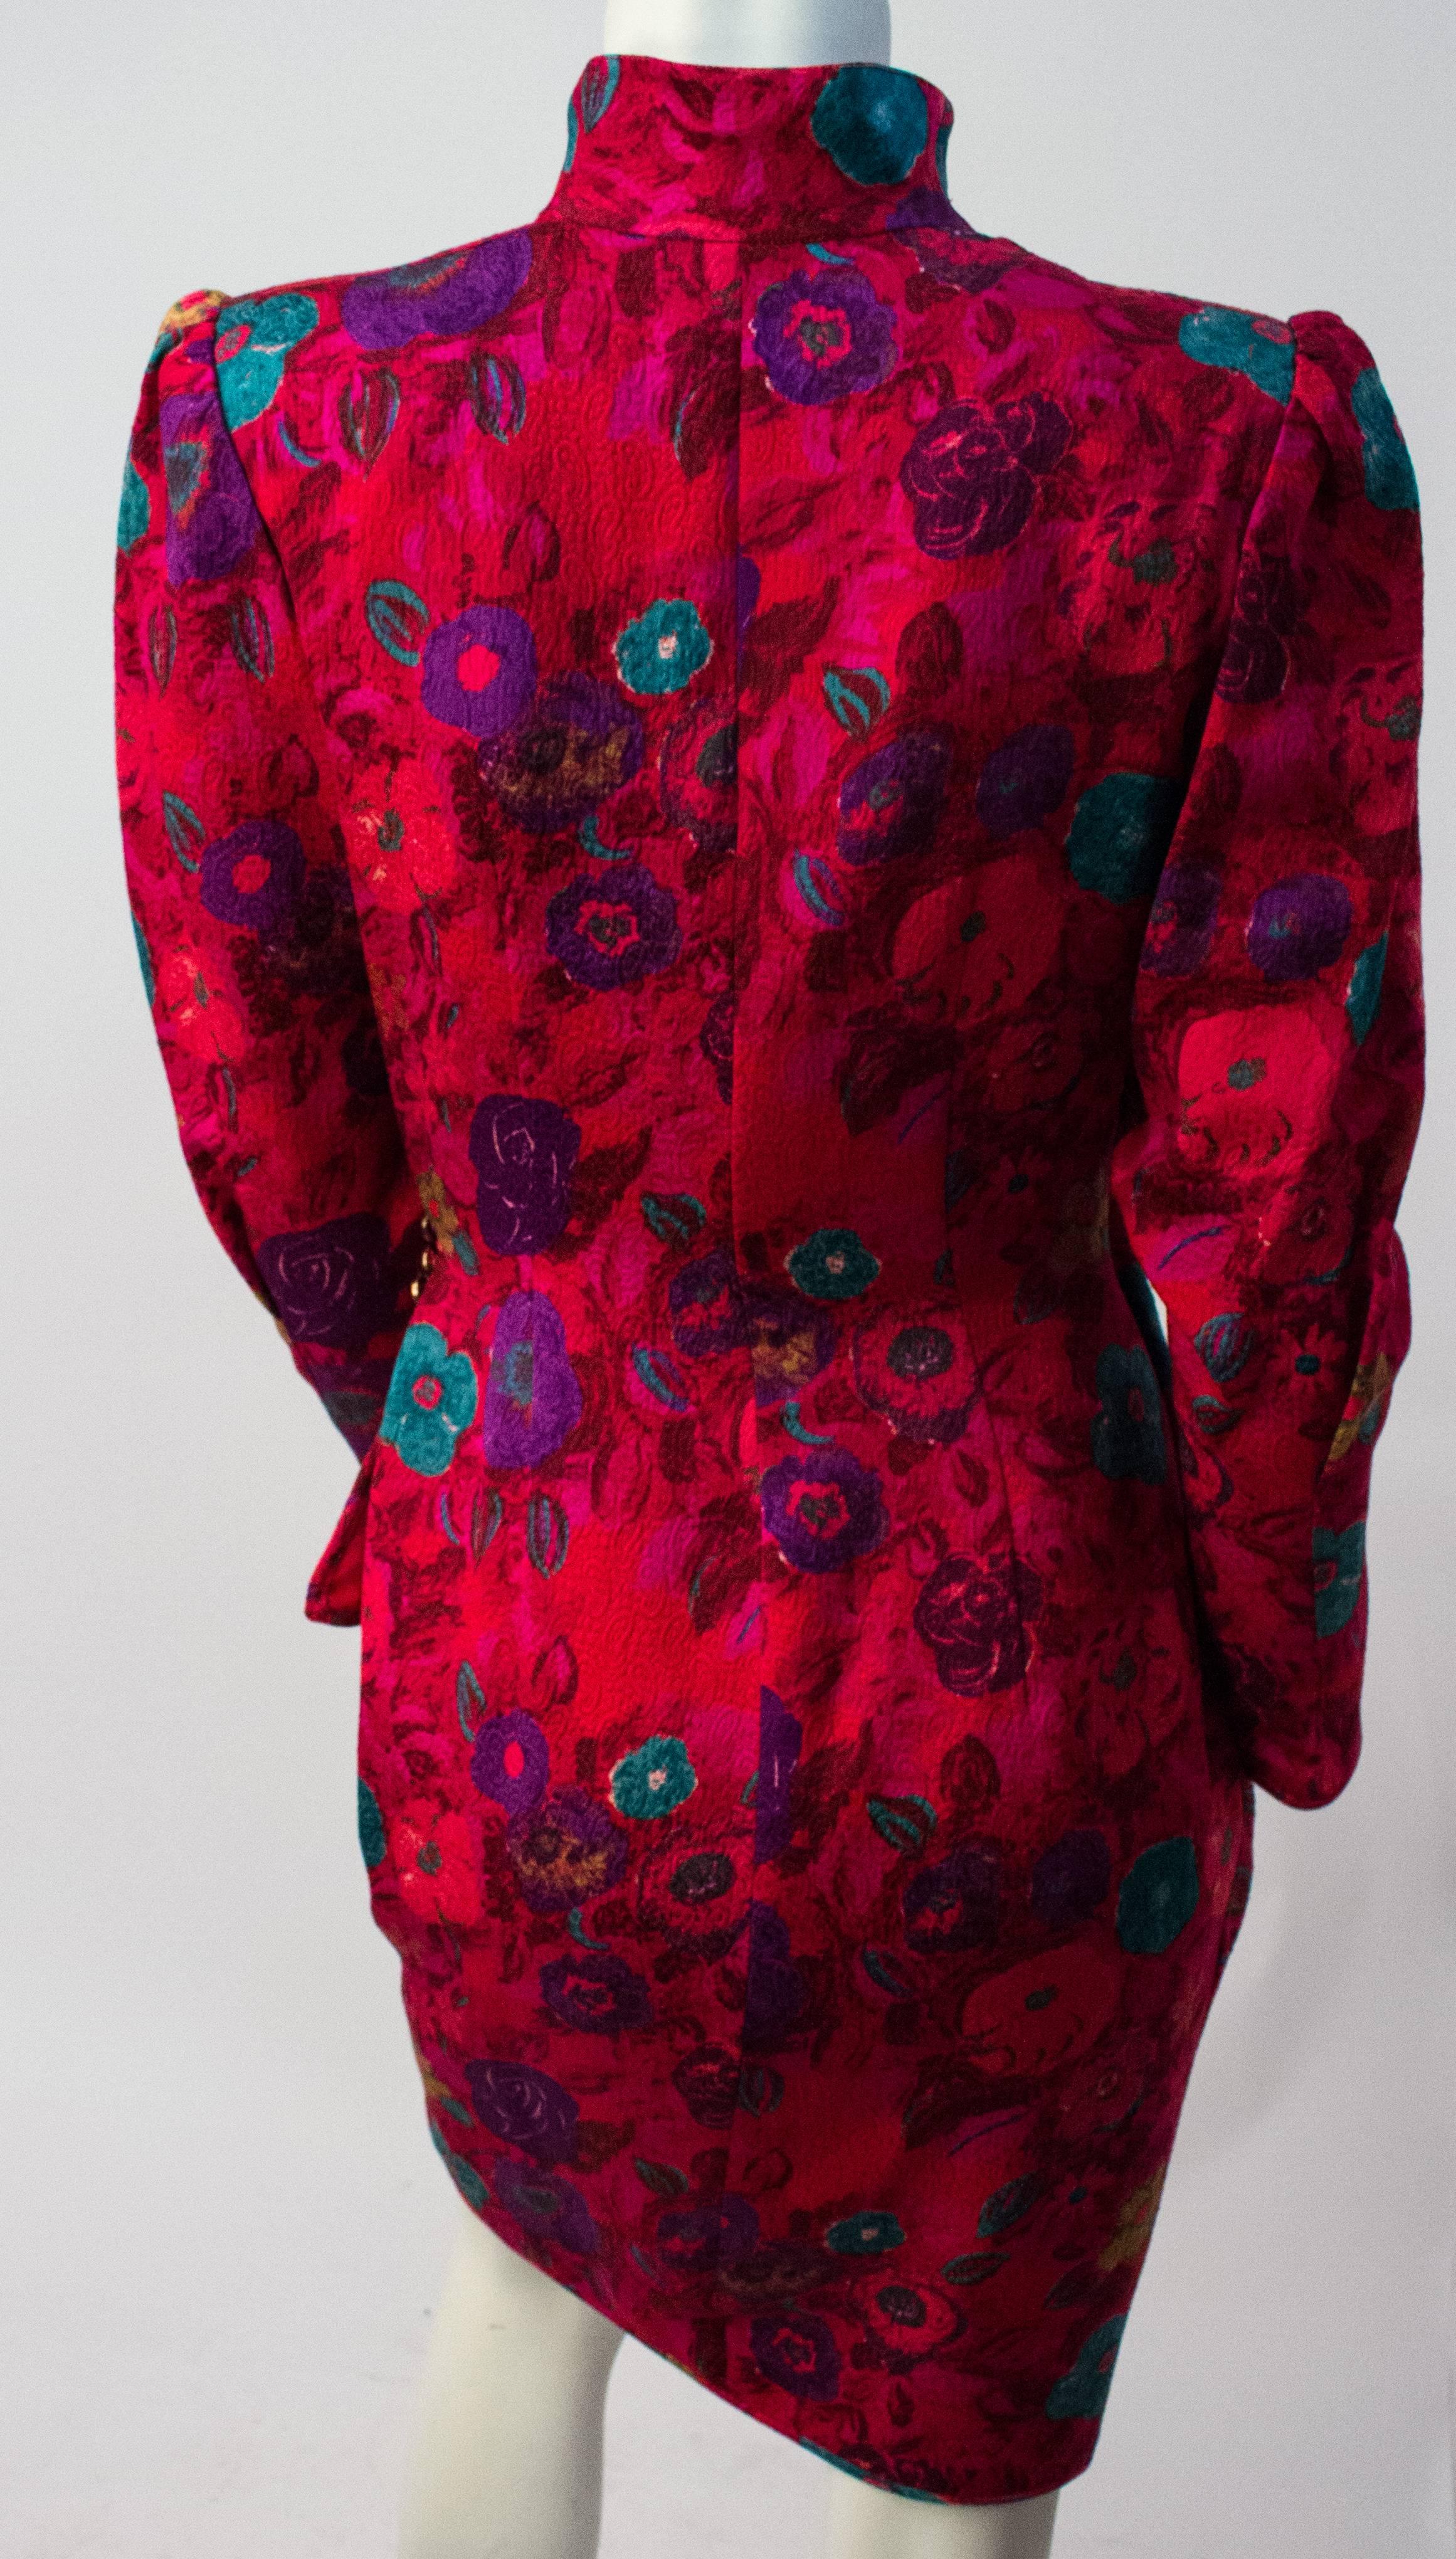 80s Ungaro Magenta Printed Jacquard Dress. Lined bodice and skirt. Hidden front zip, button side closures. 